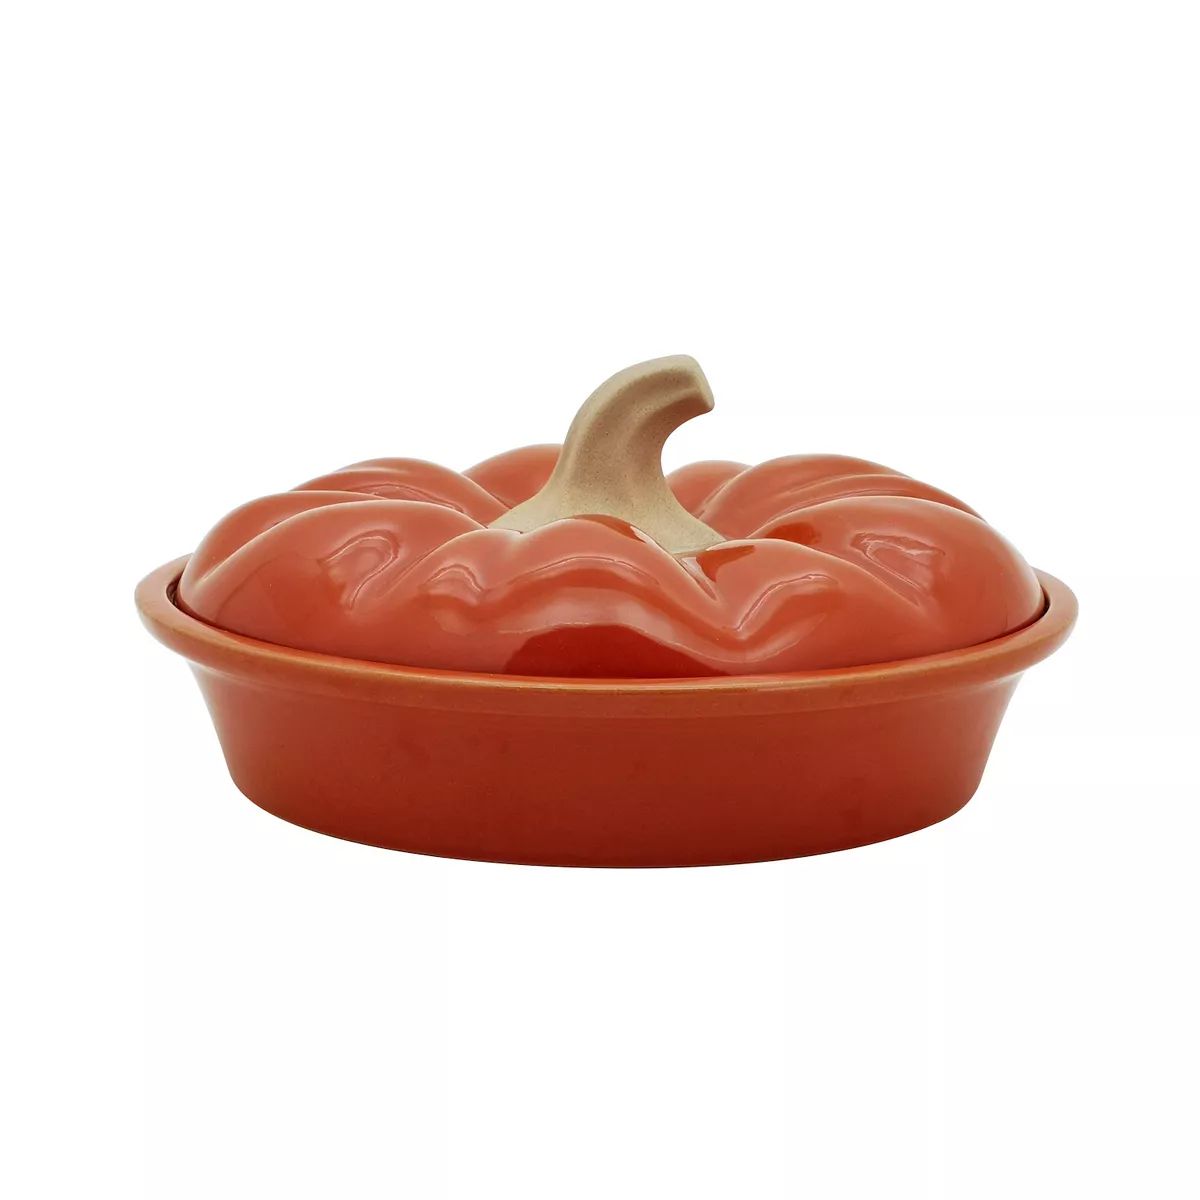 Celebrate Together™ Fall Harvest Figural Pie Plate and Cover | Kohl's